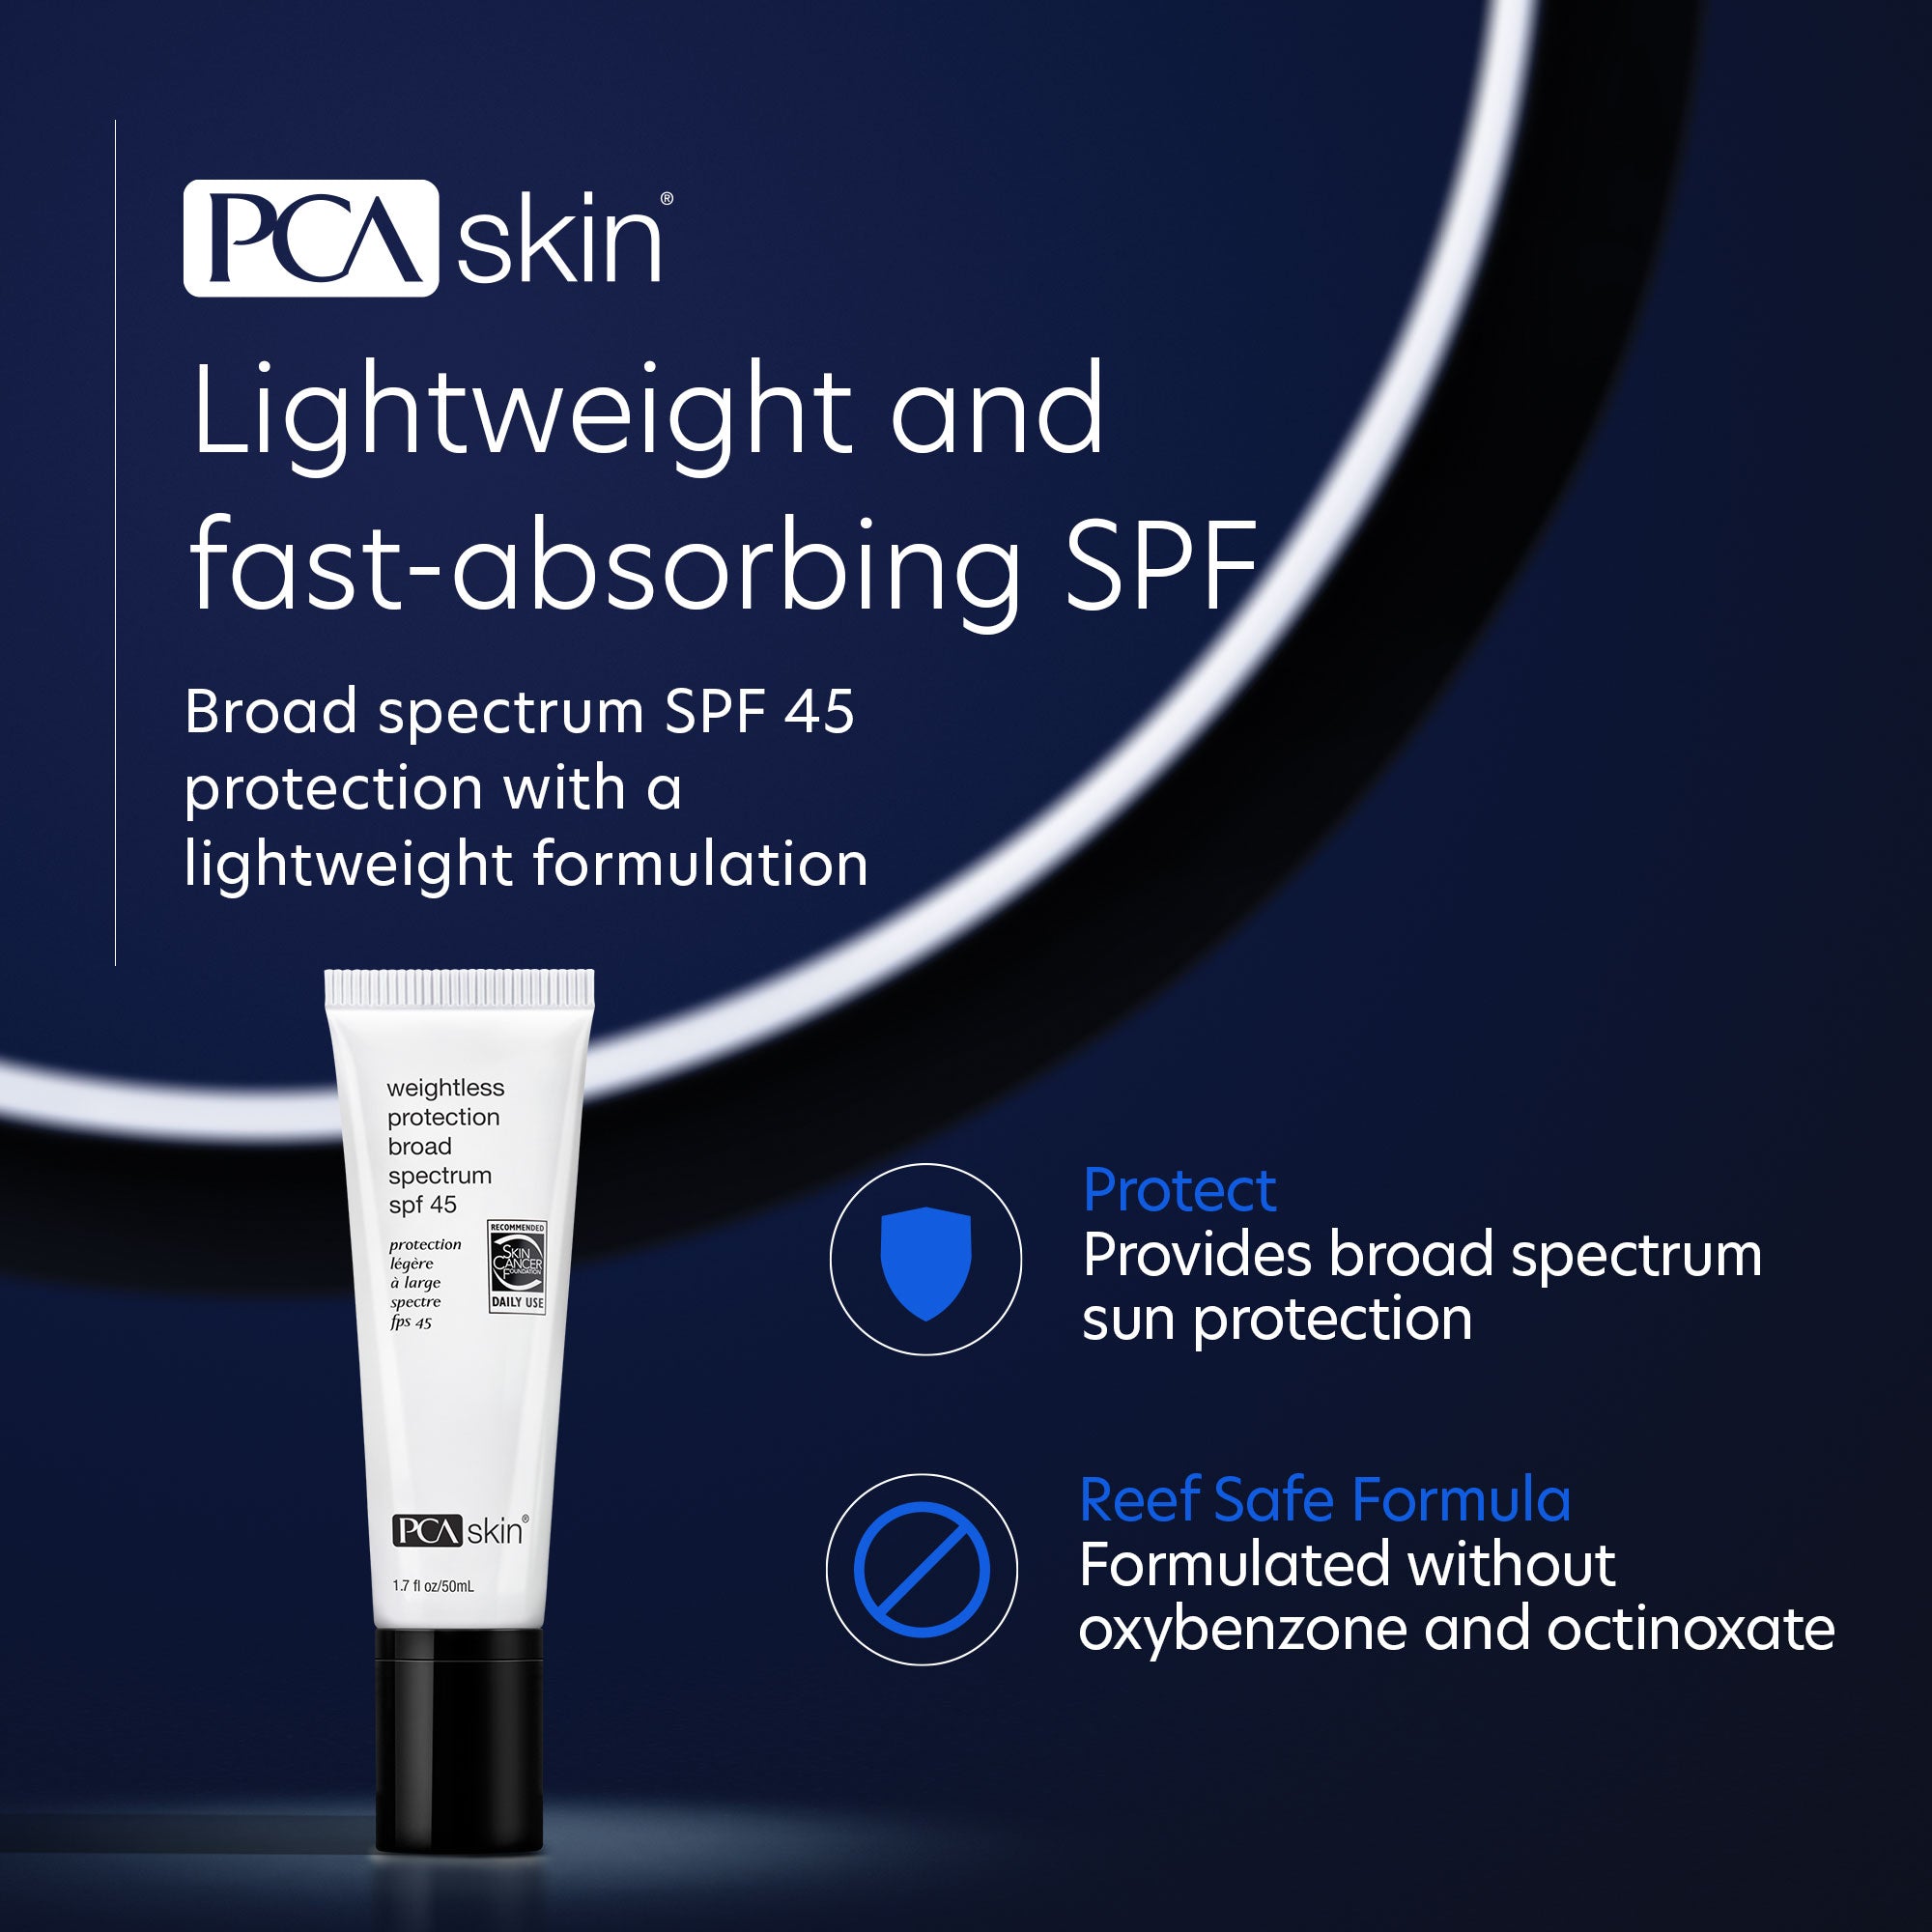 PCA Skin Weightless Protection Broad Spectrum SPF 45 (1.7 oz)